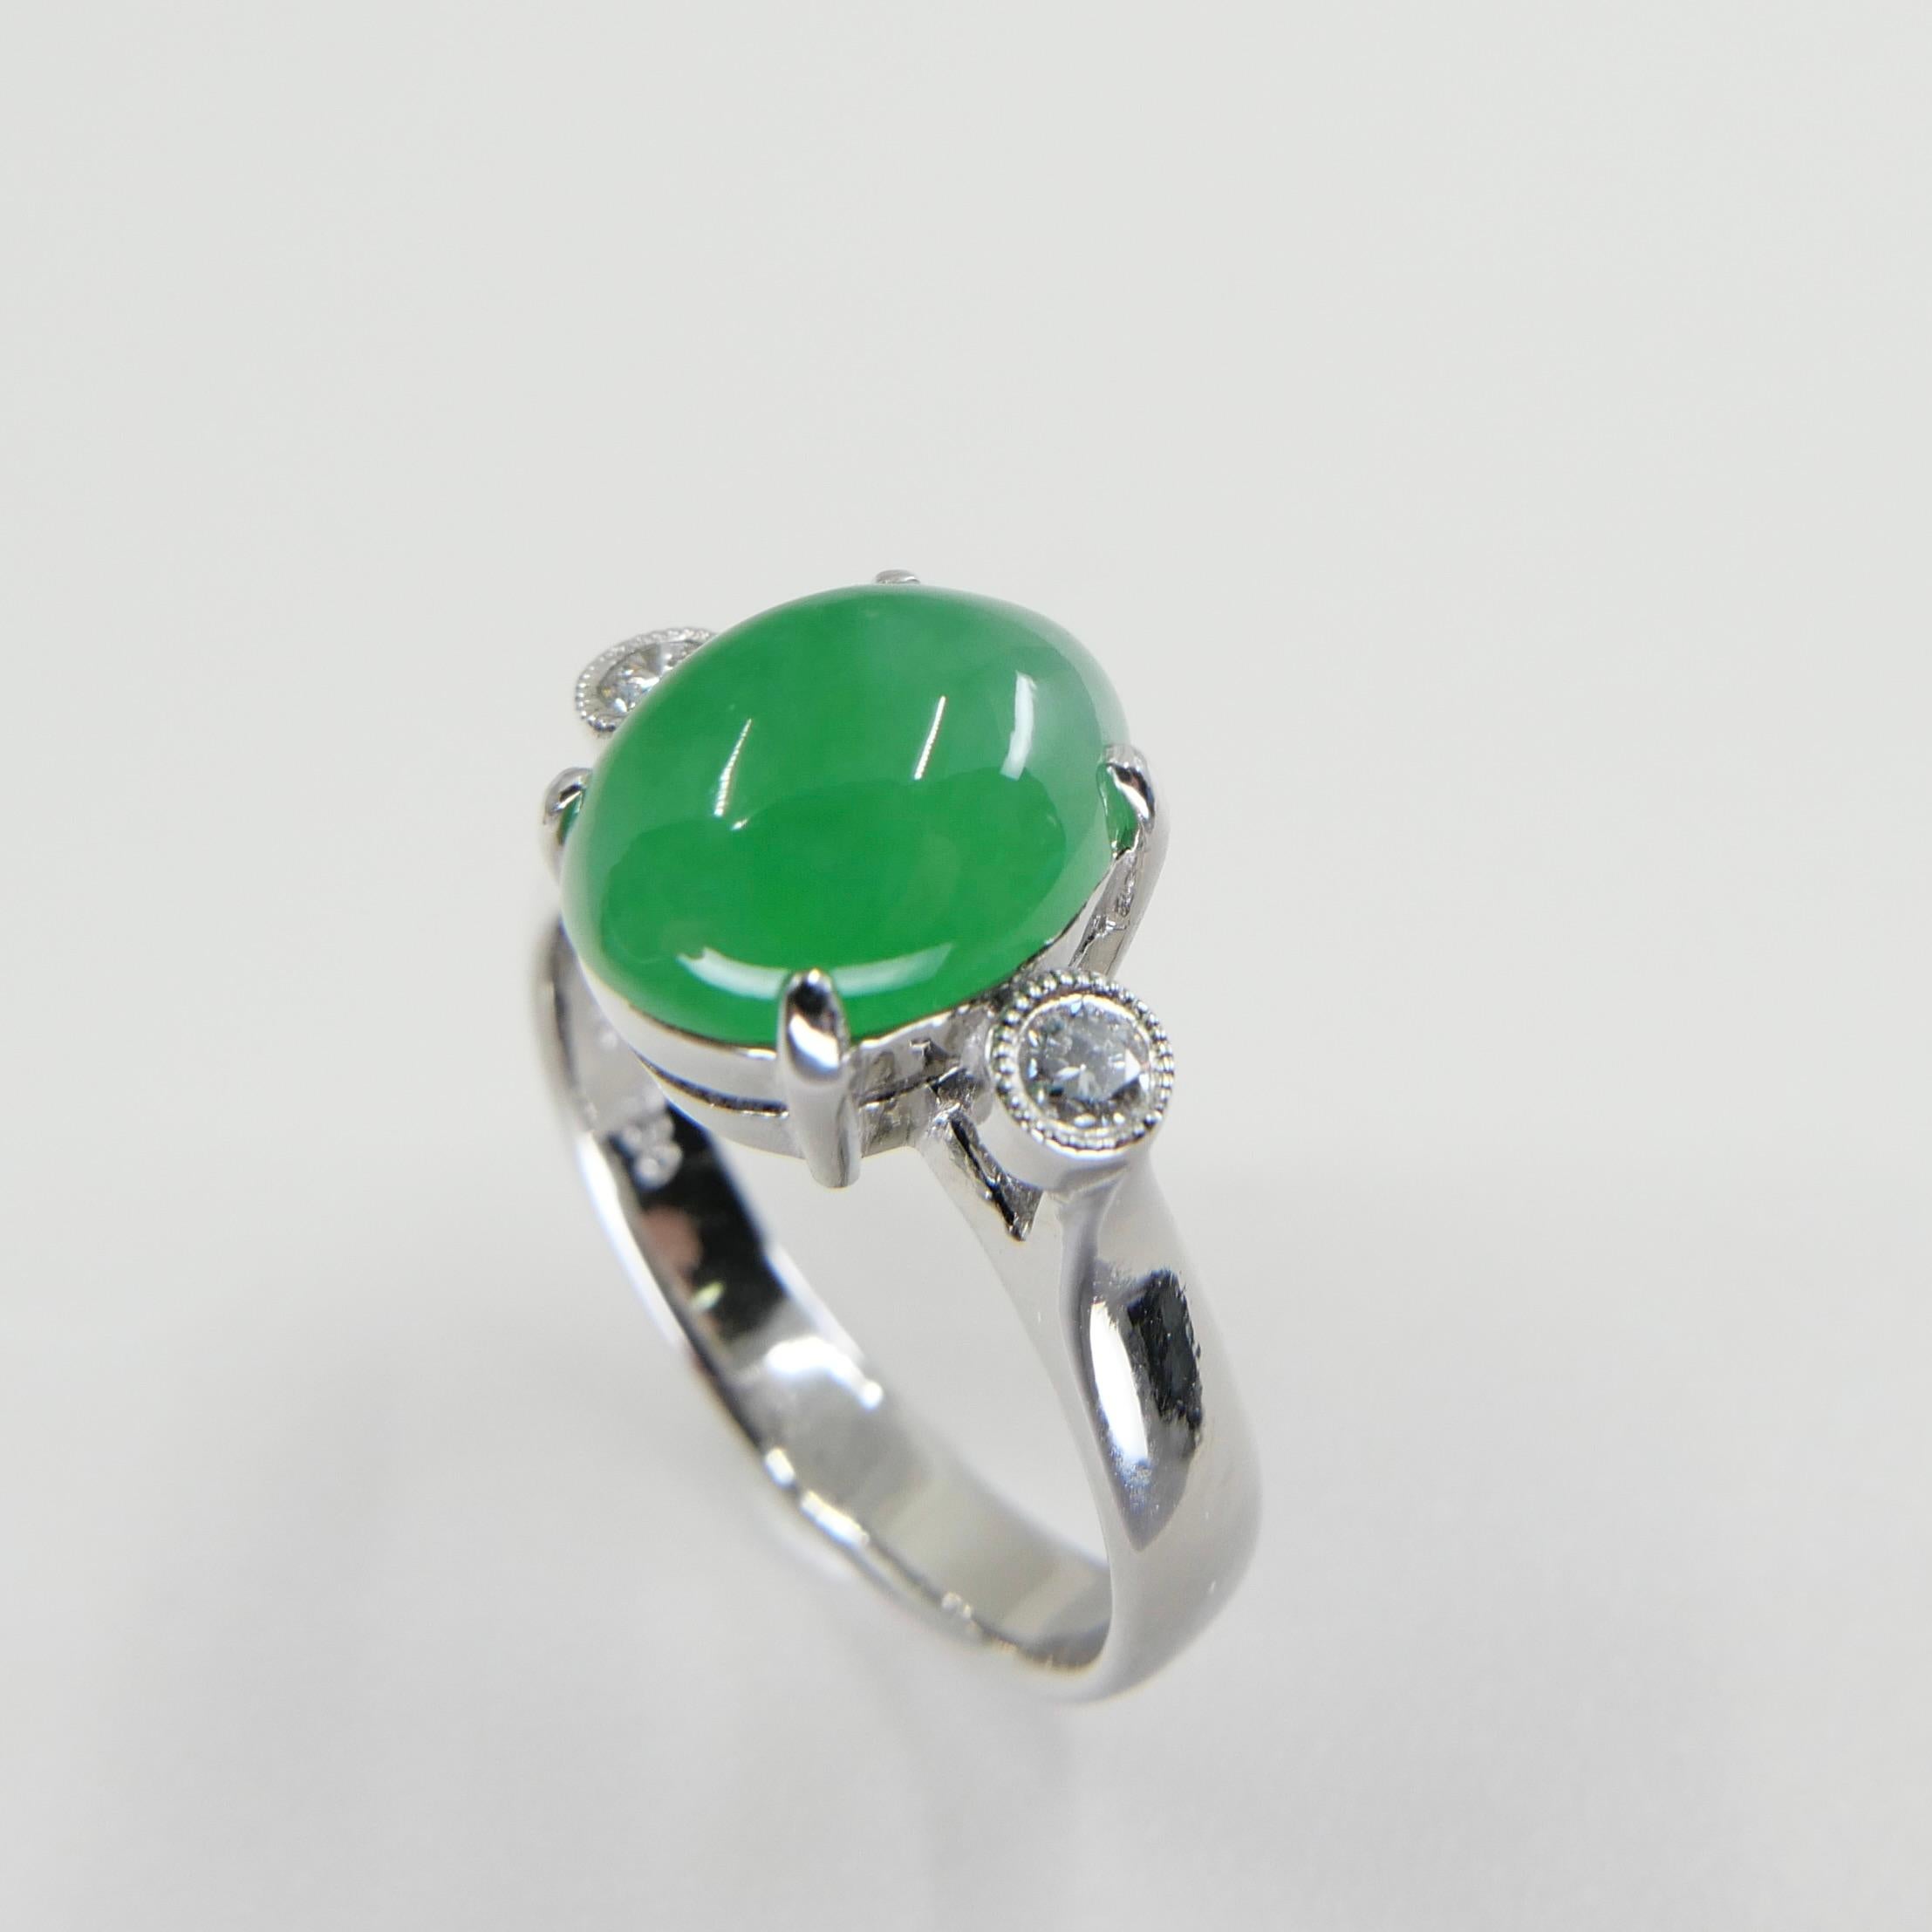 Certified Type a Jade & Oval Diamond 3 Stone Ring, Glowing Apple Green Color For Sale 5